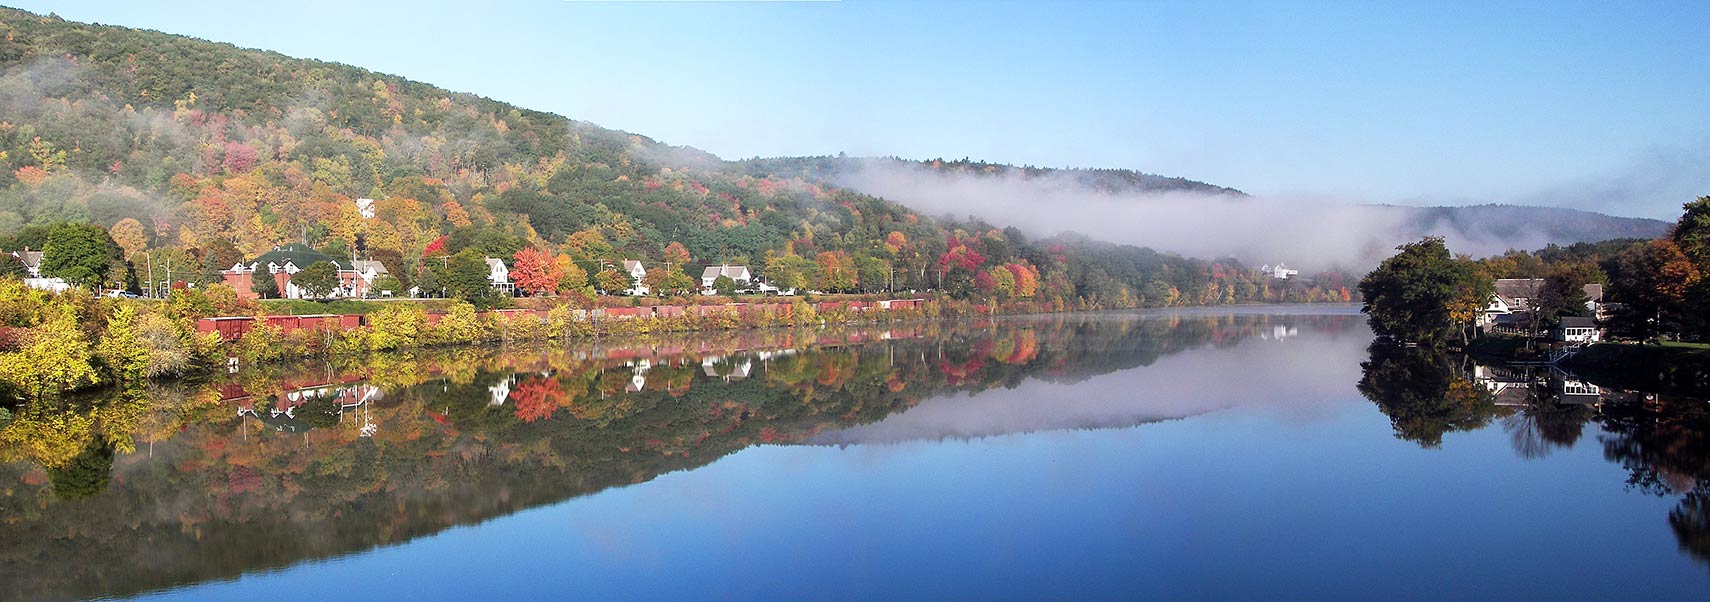 Connecticut River at Bellows Falls village, Rockingham, Windham County